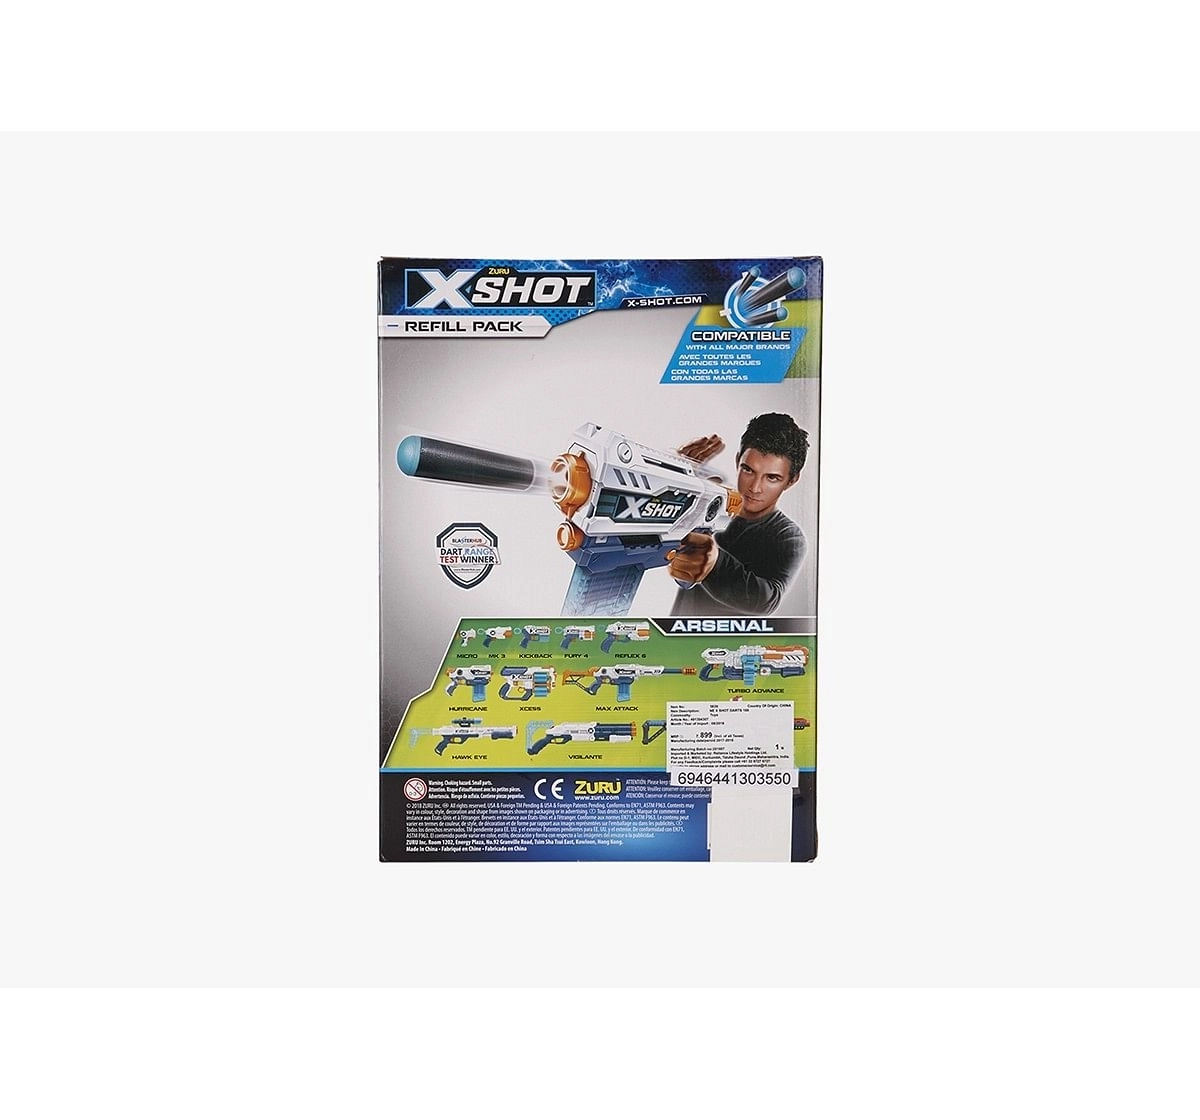 X-Shot 100 Darts Refill Pack Target Games  for Kids age 8Y+ (Grey)